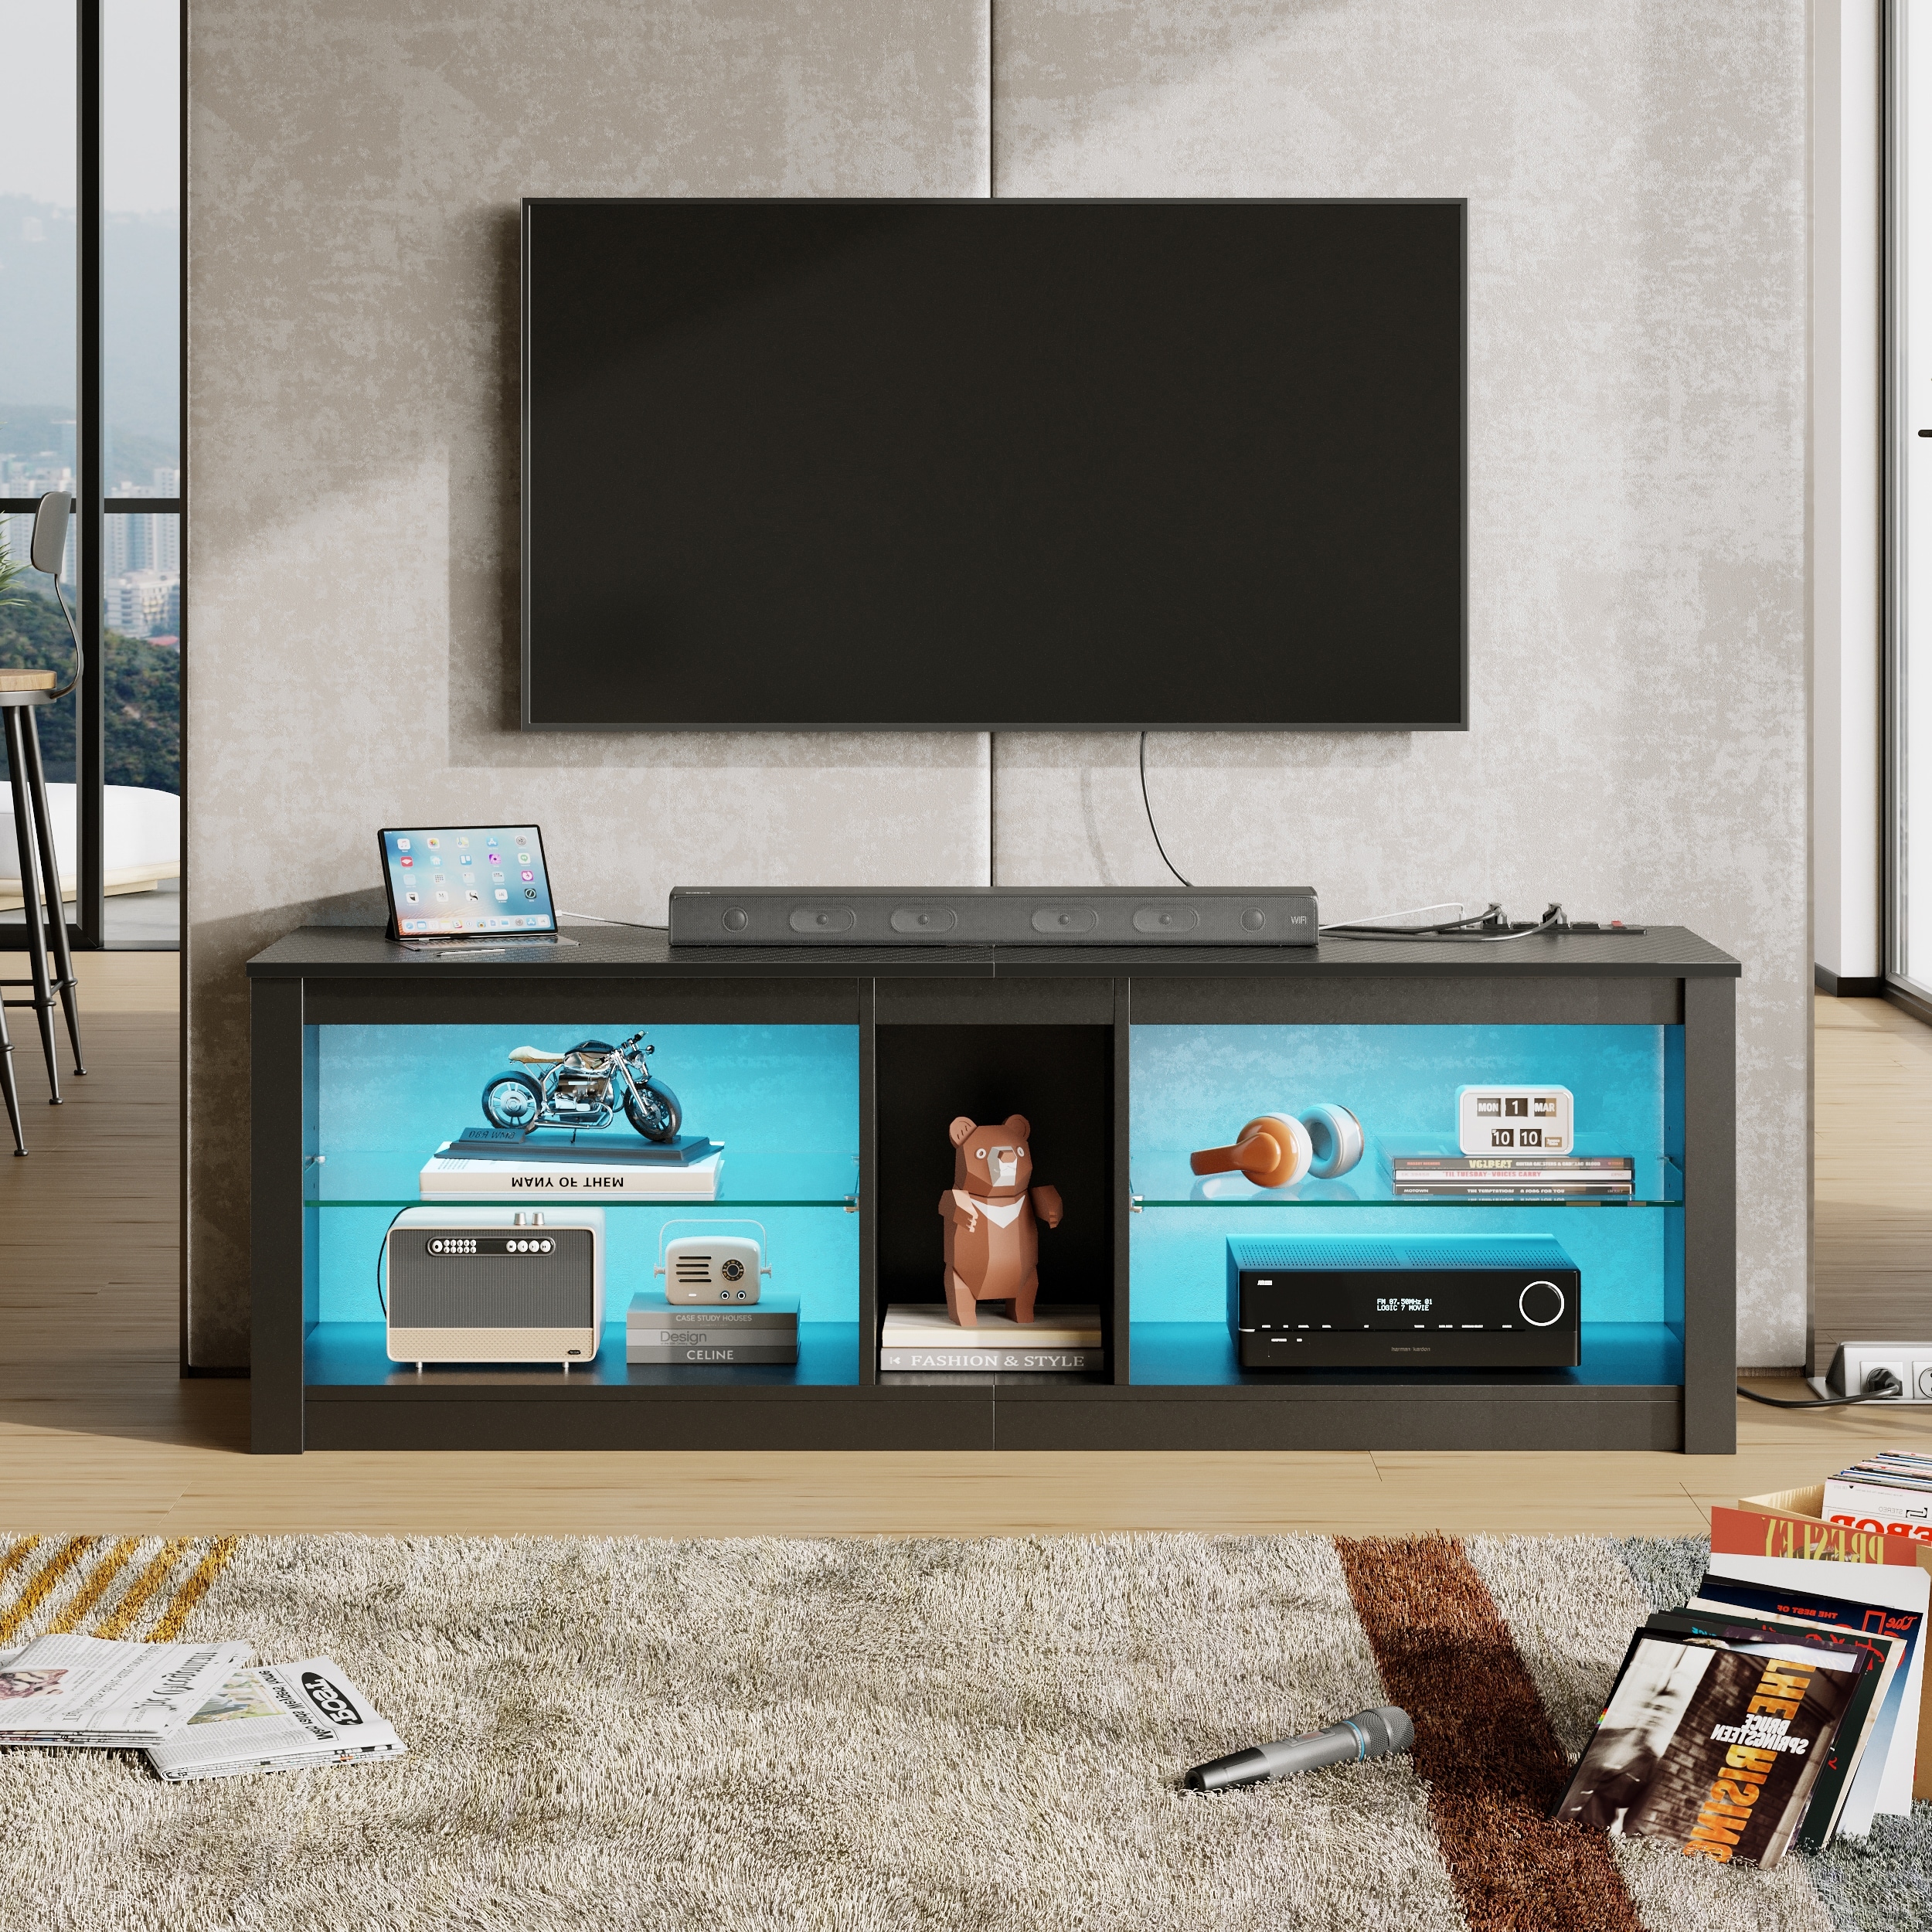  Bestier Entertainment Center, Gaming TV Stand for 70 inch TV,  LED TV Stand with Modern Glass Shelve, TV Media Console for Video Games,  Movies, Home Decor, Rustic Brown : Home 